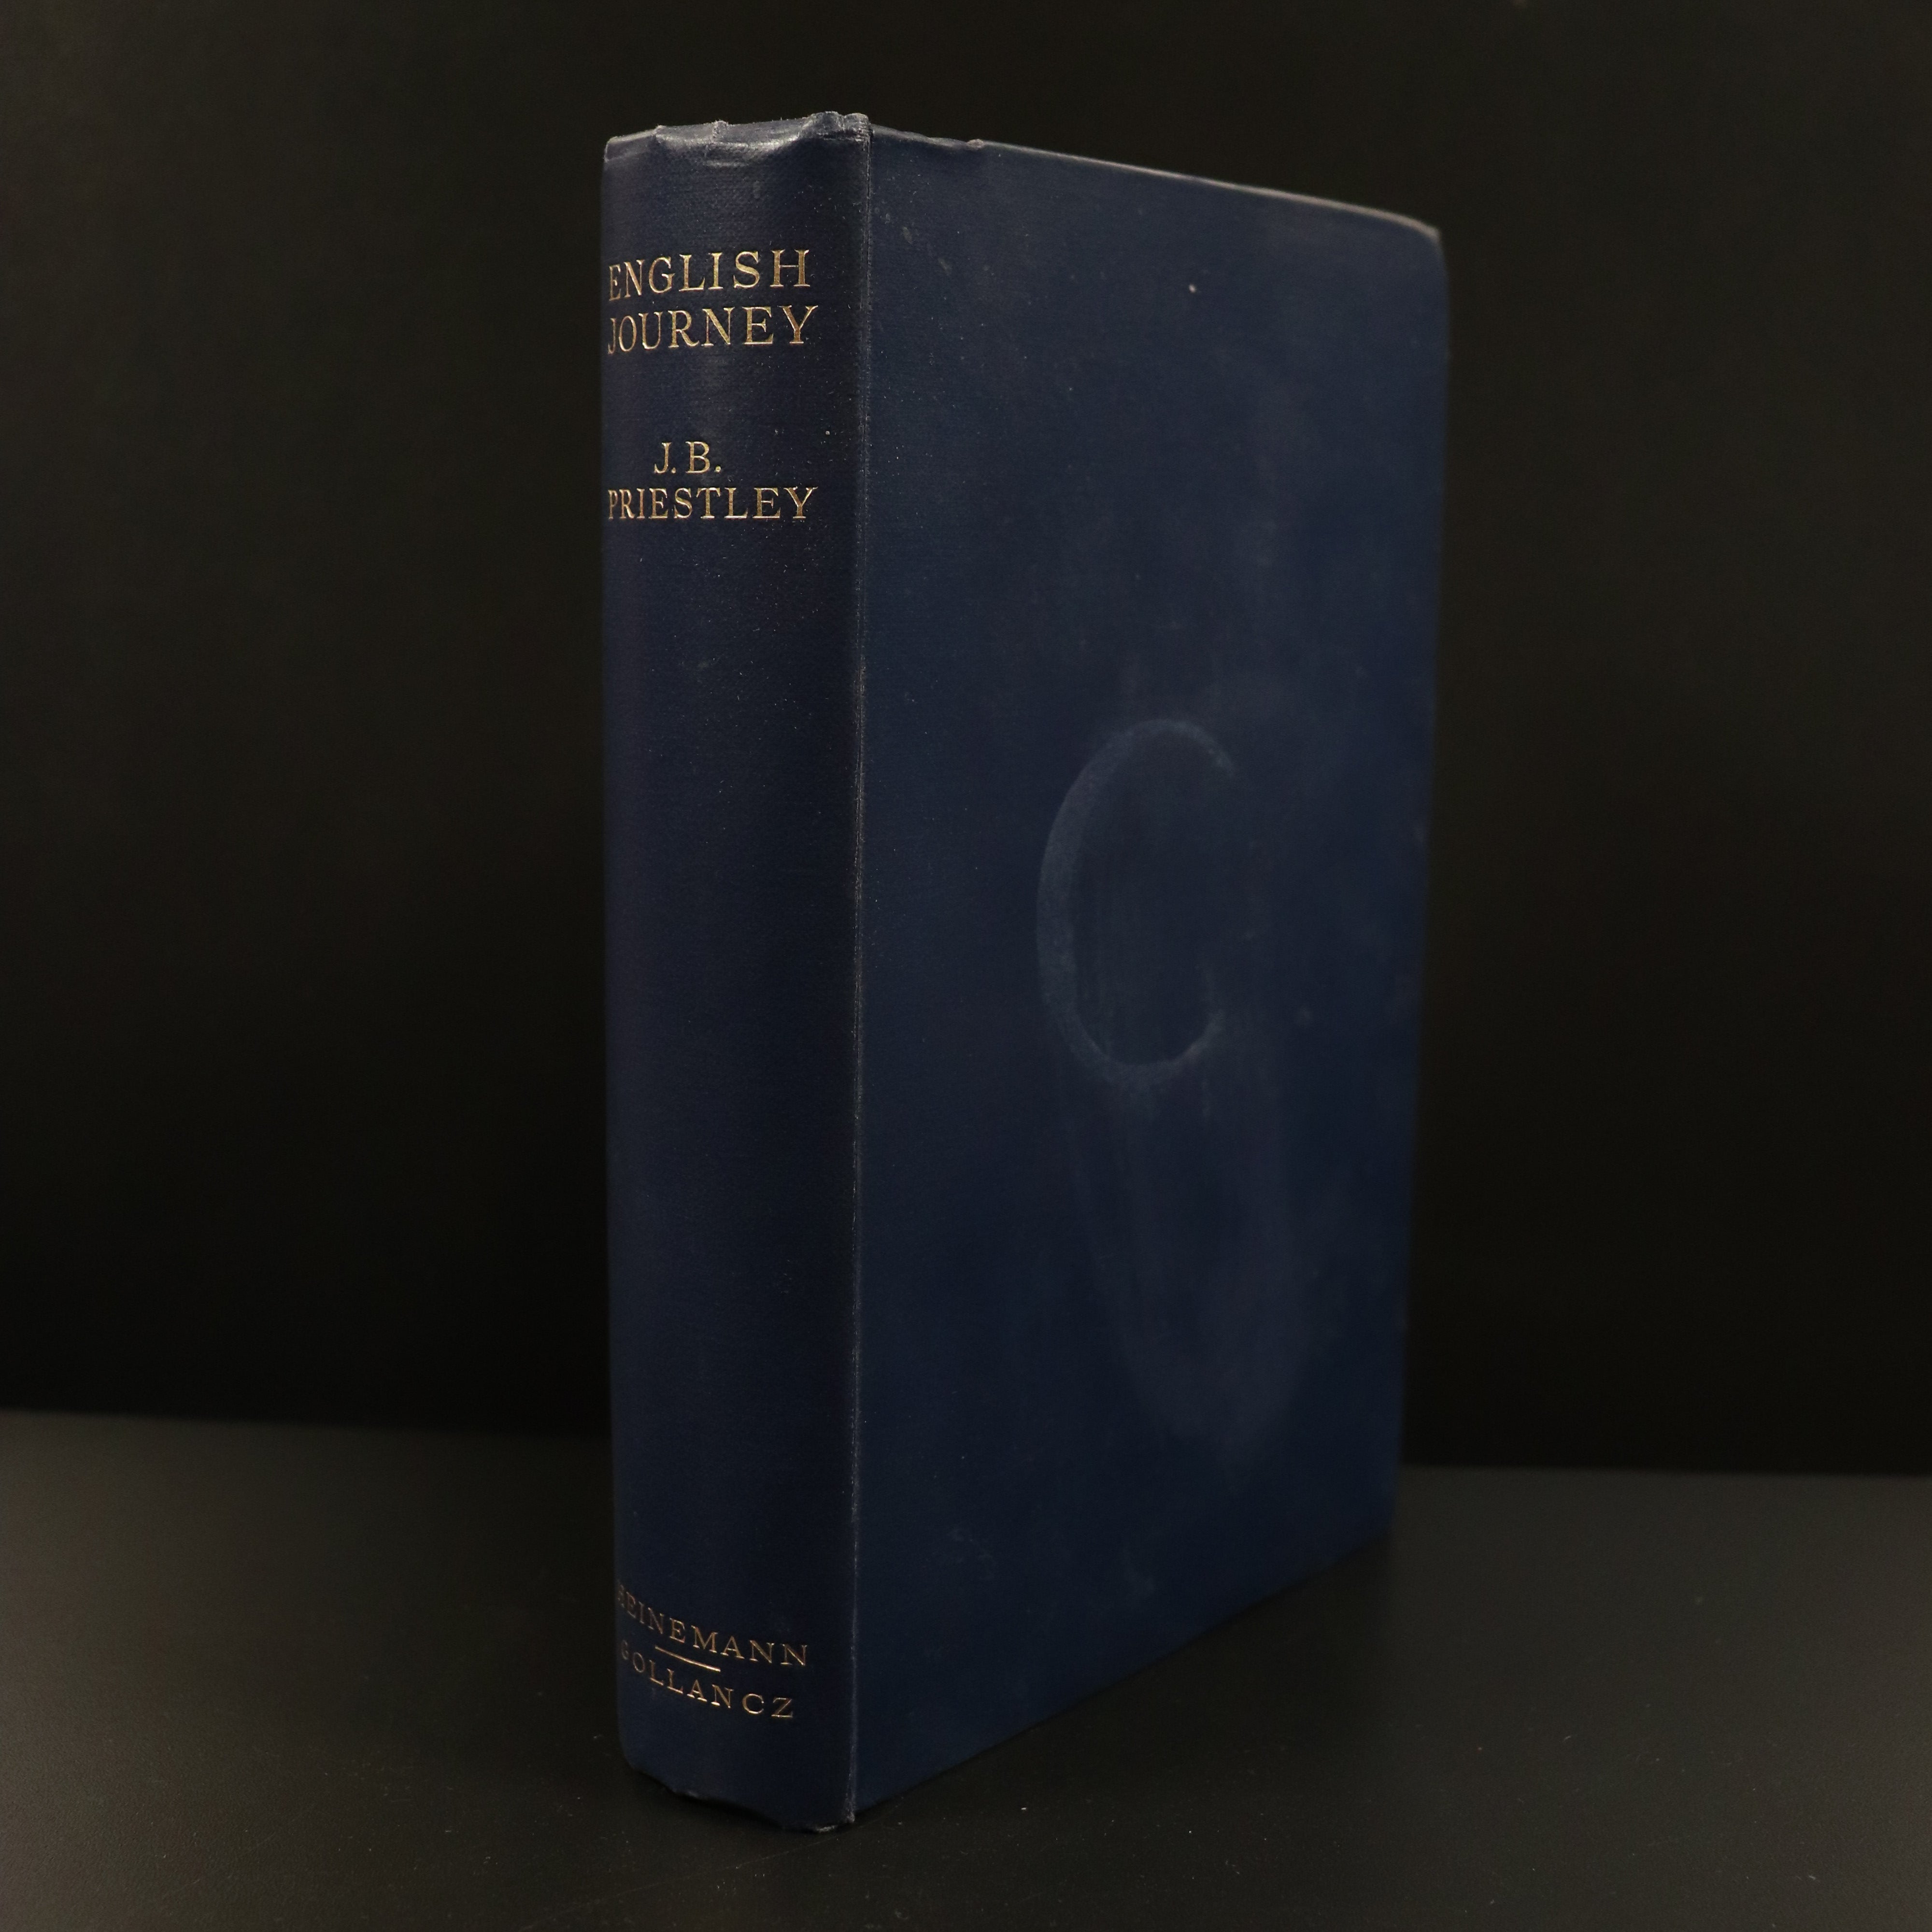 1934 English Journey by JB Priestley 1st Edition Travel Book England